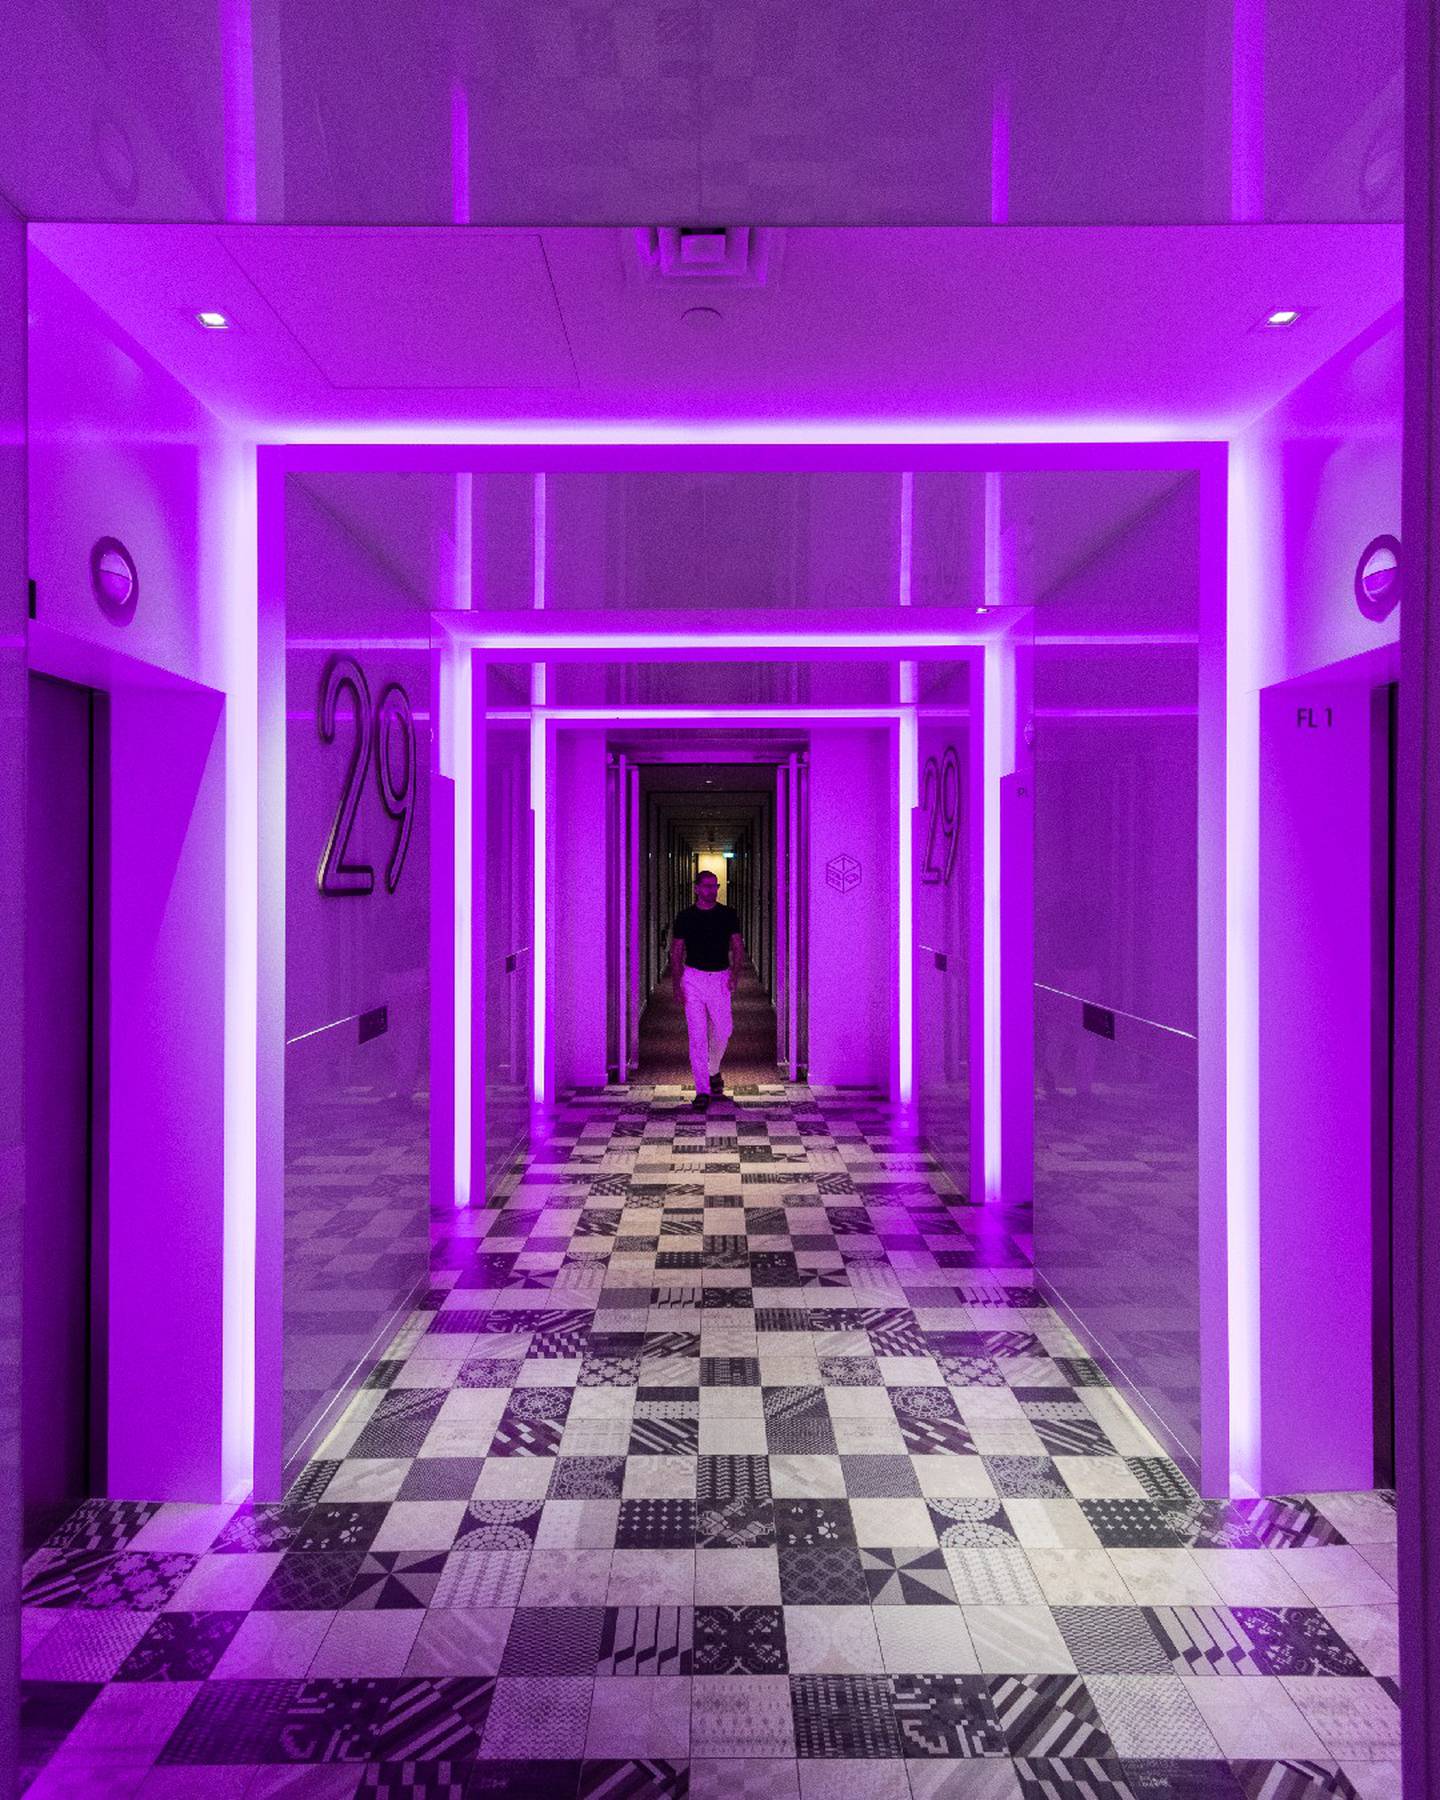 Yotel properties around the world are known for their funky purple design and affordable rates. Photo: Yotel / Facebook